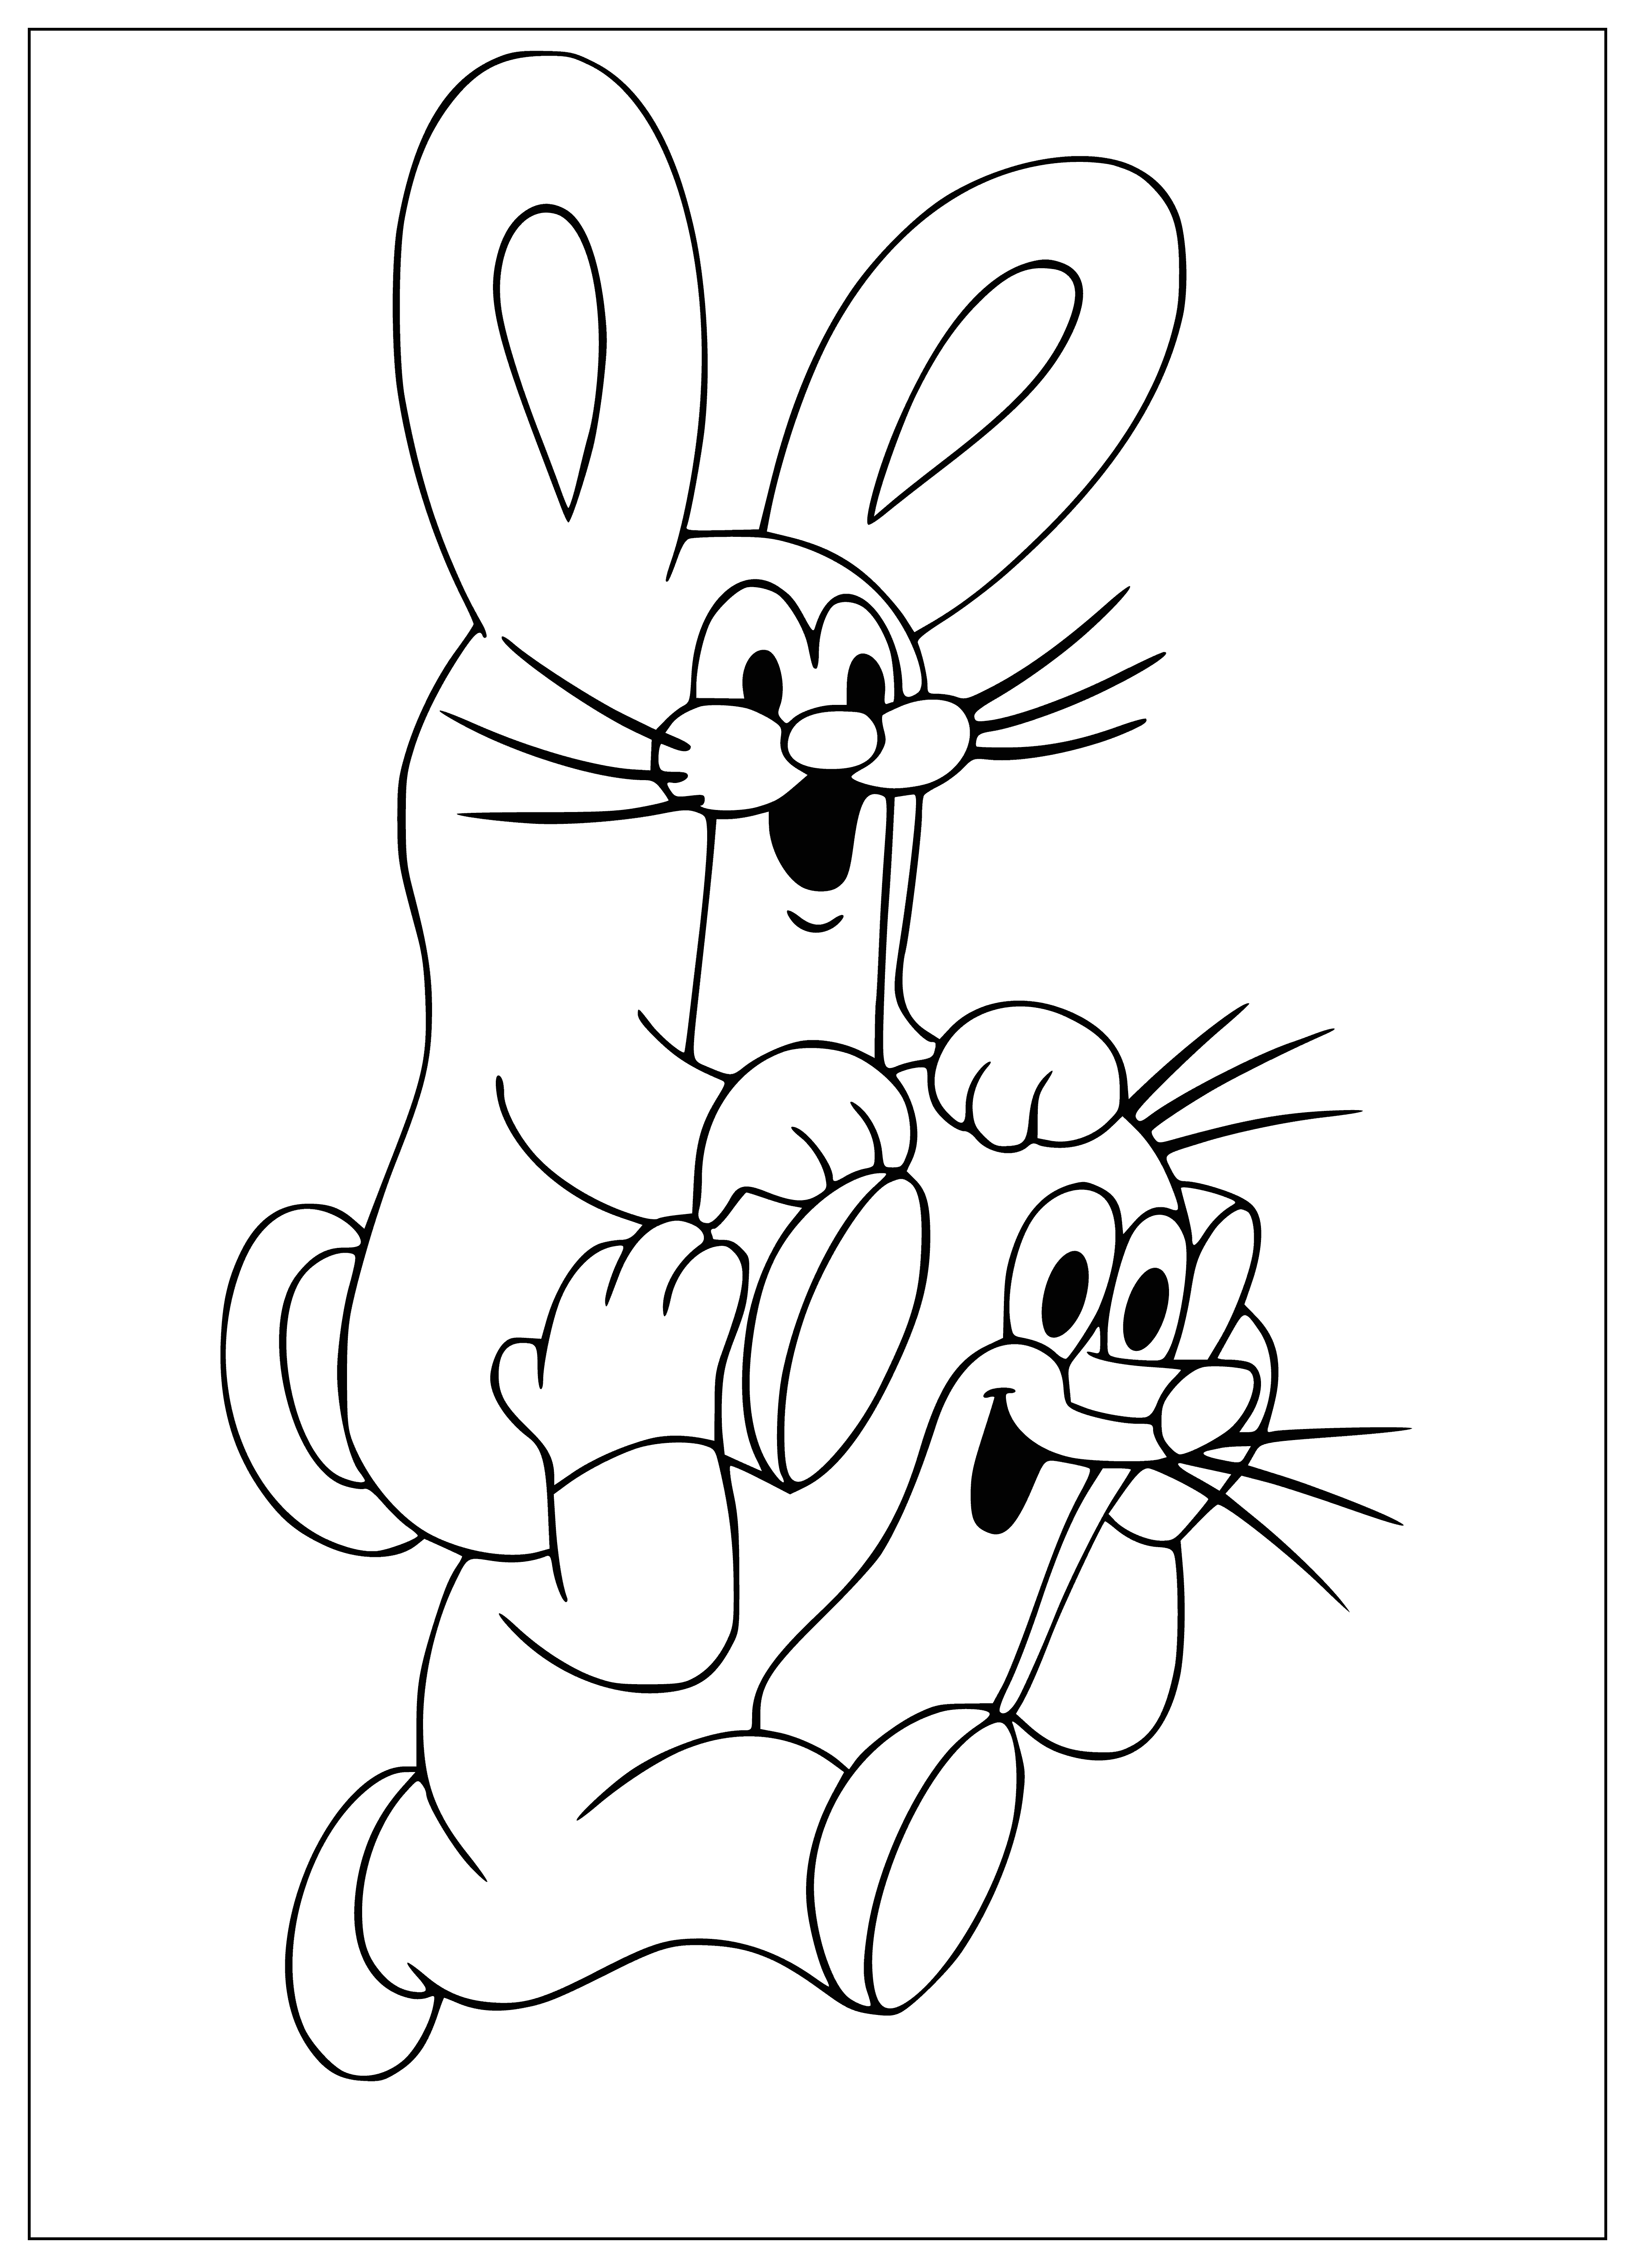 Mole and Hare coloring page